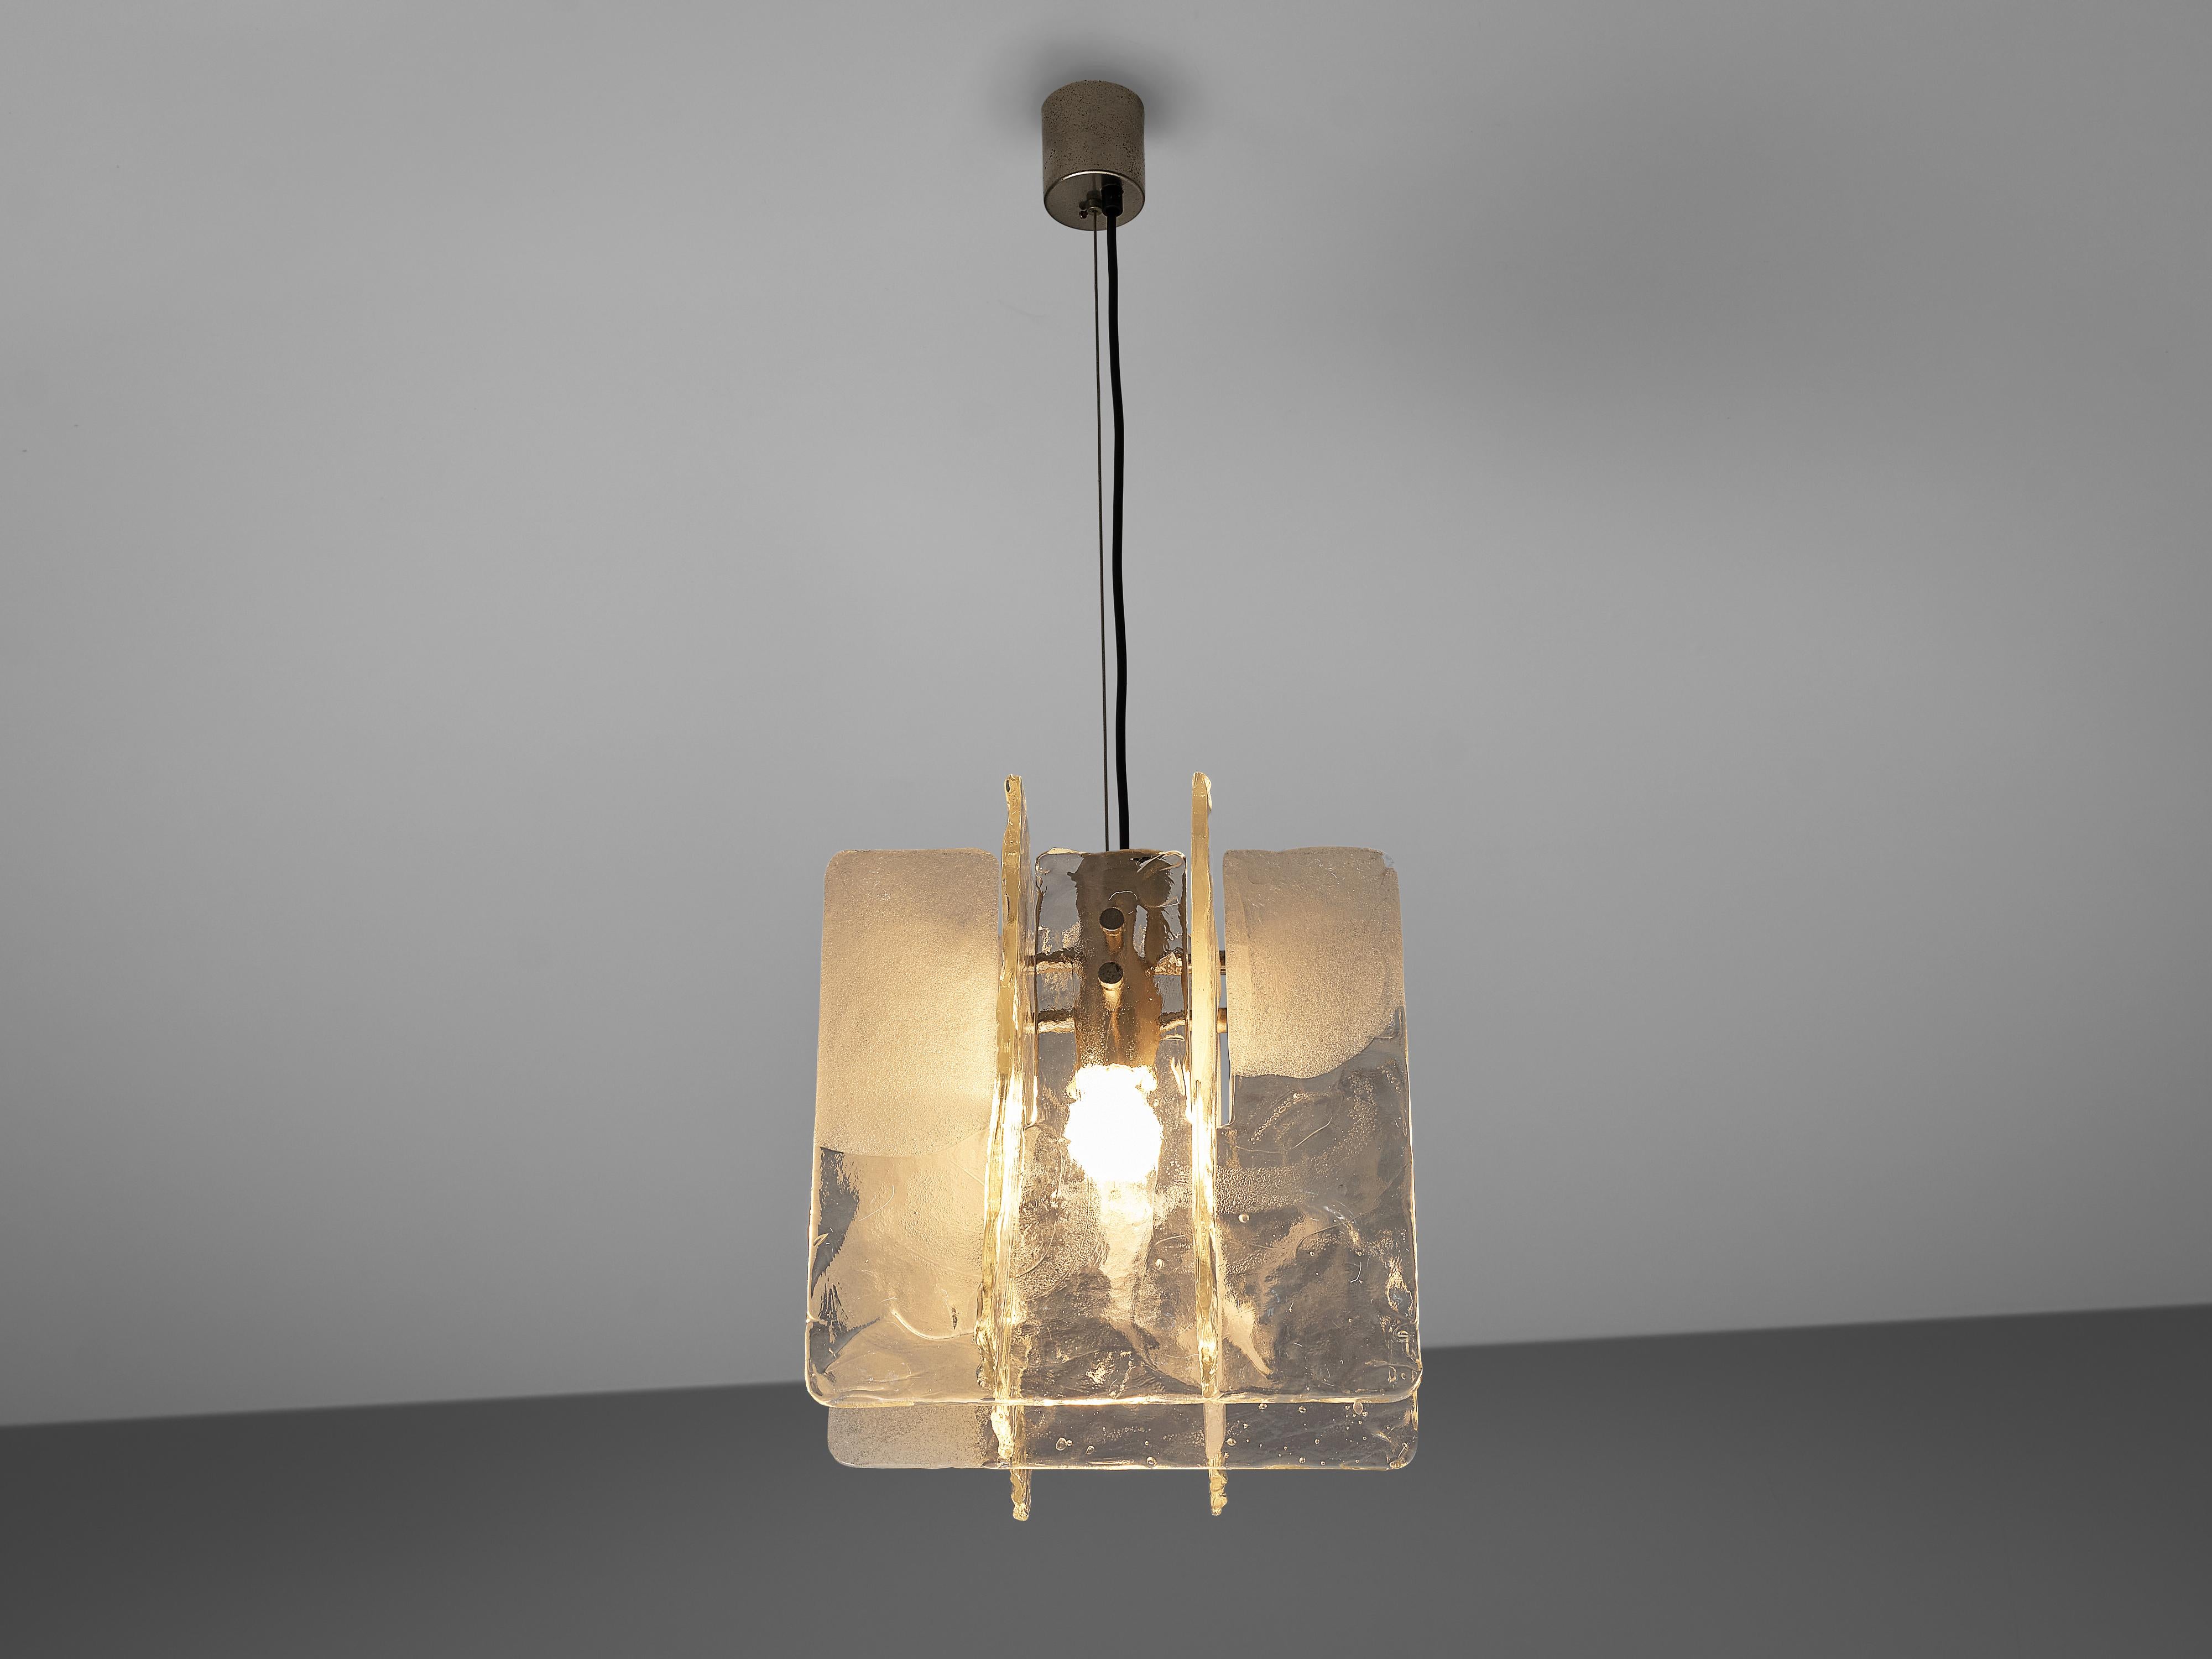 Pendant, glass, brass, Italy, 1960s

Stunning sculptural glass pendant. The lamp has an elegant feel created by its structured, yet delicate form. This is emphasized by the brass elements. The glass has a nice structure to break the light and